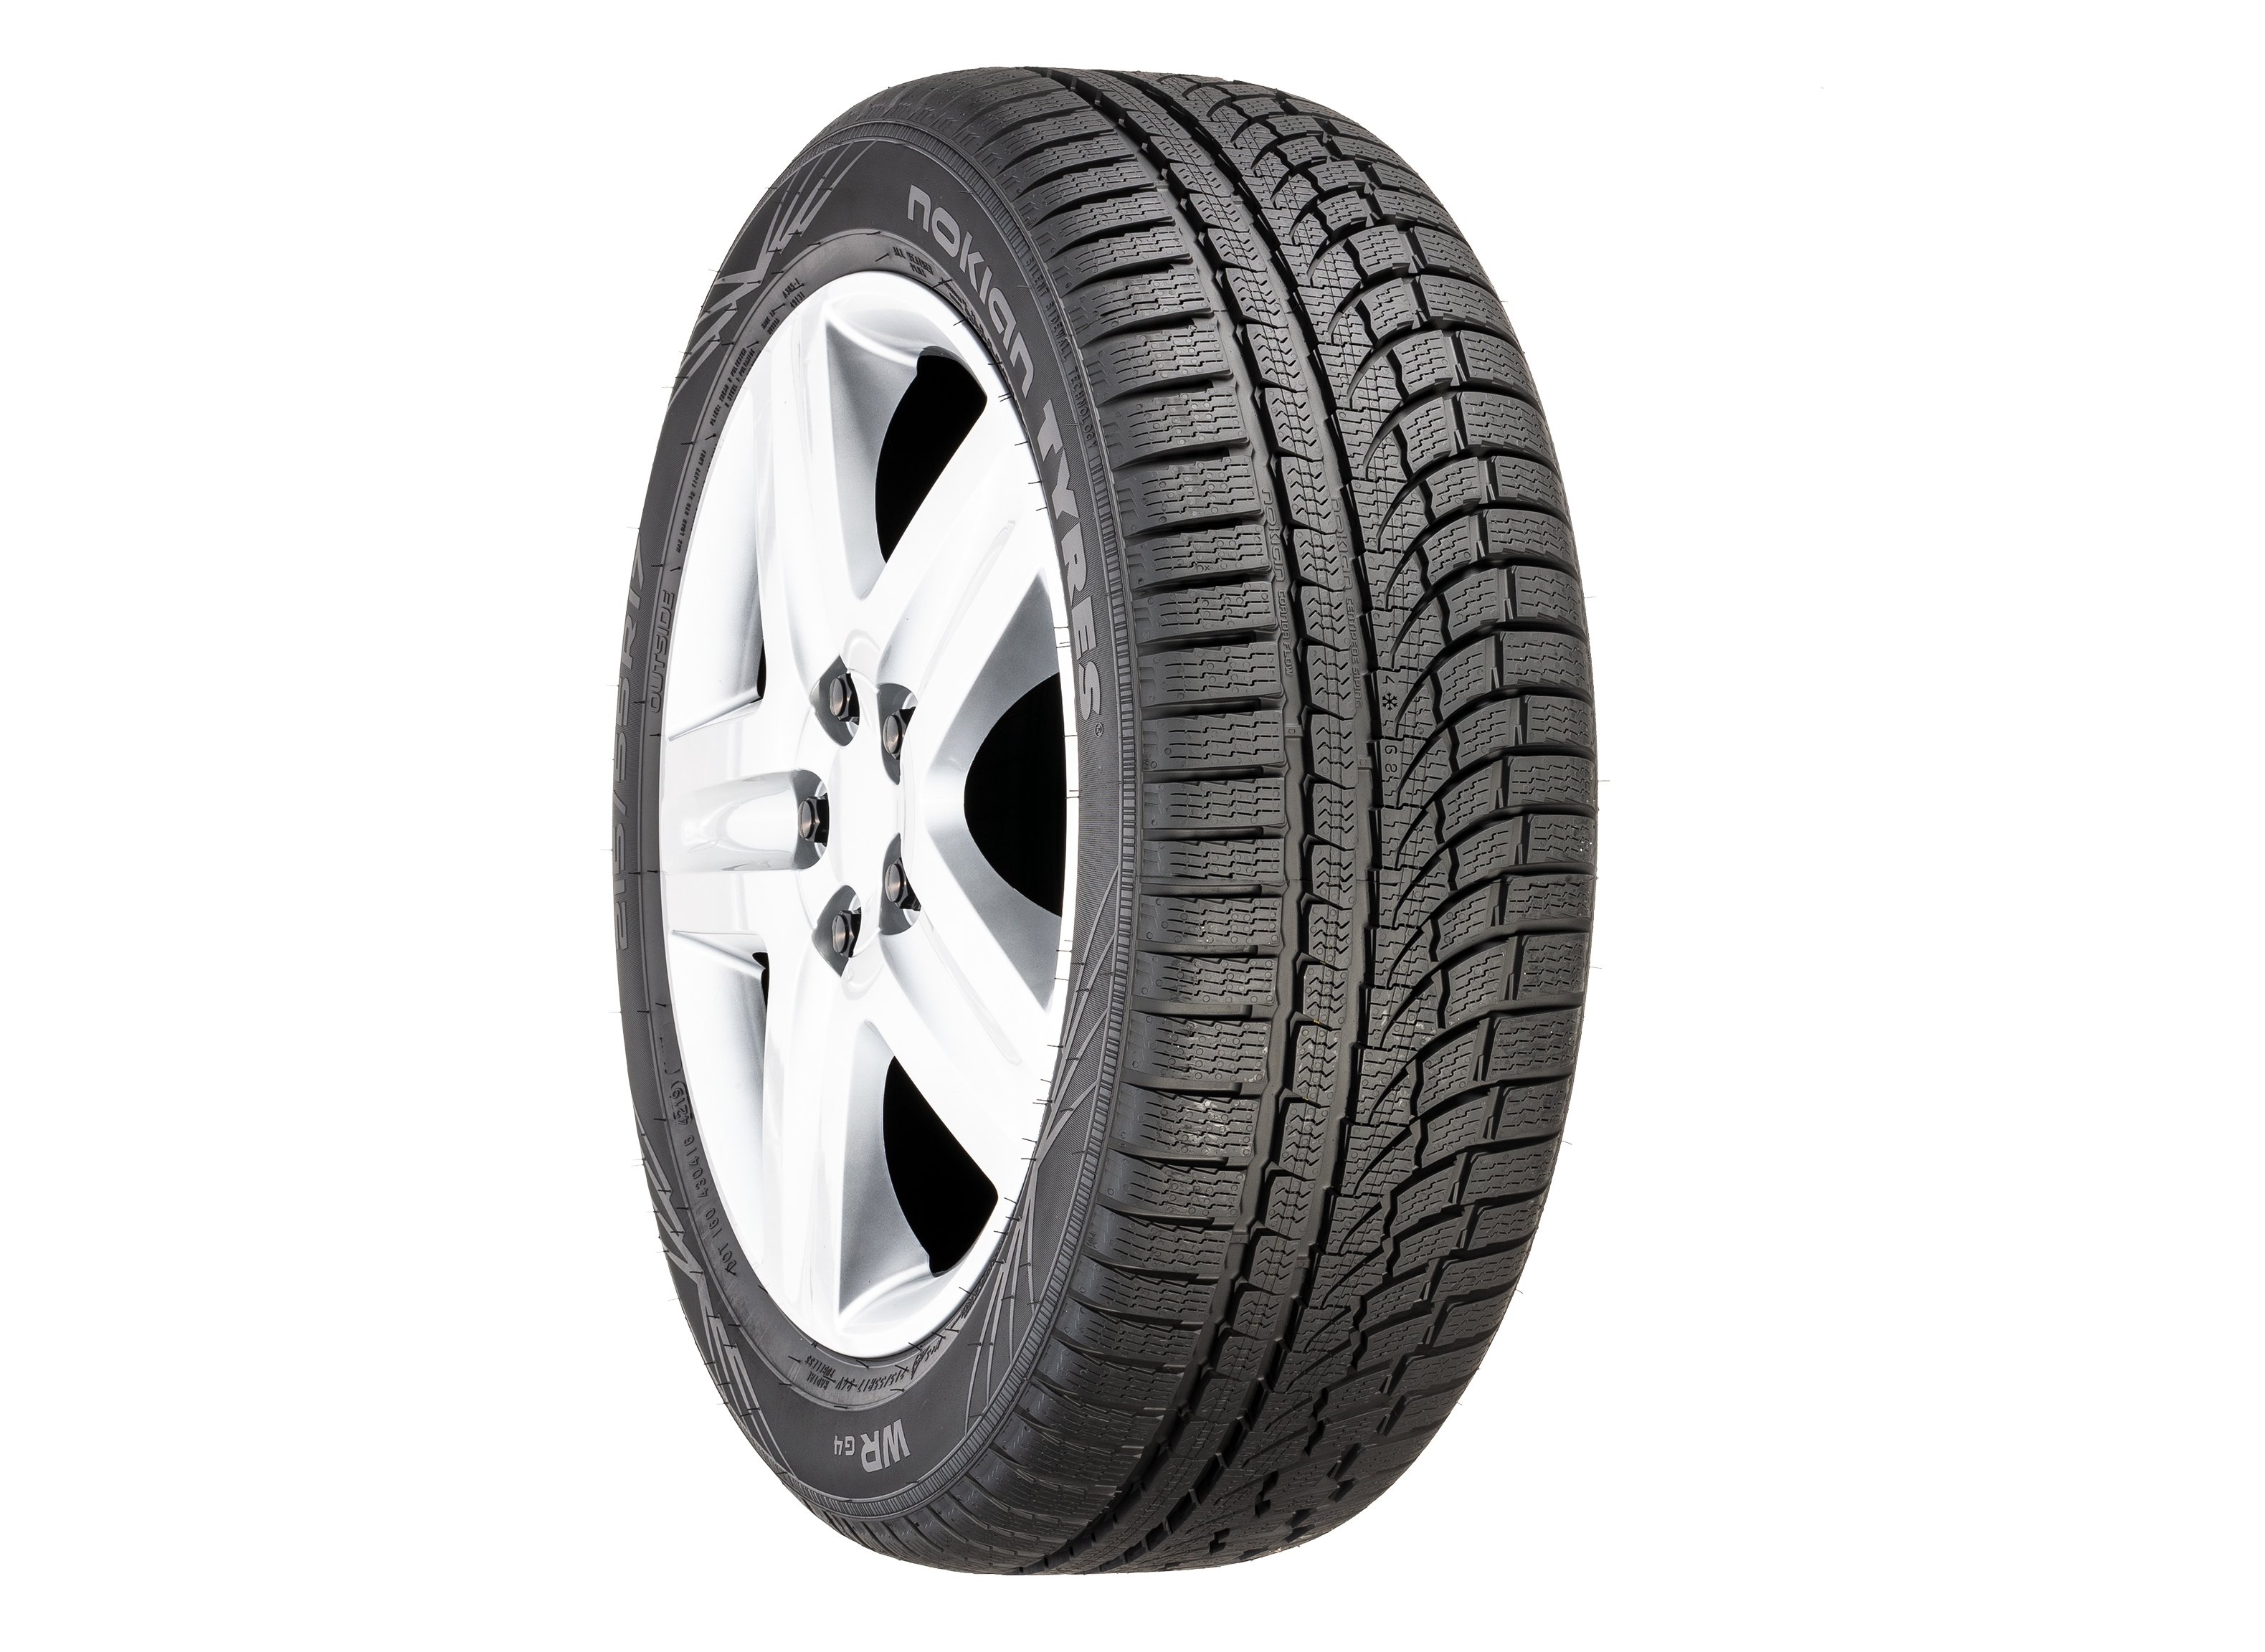 Consumer Tire WRG4 Nokian Reports Review -